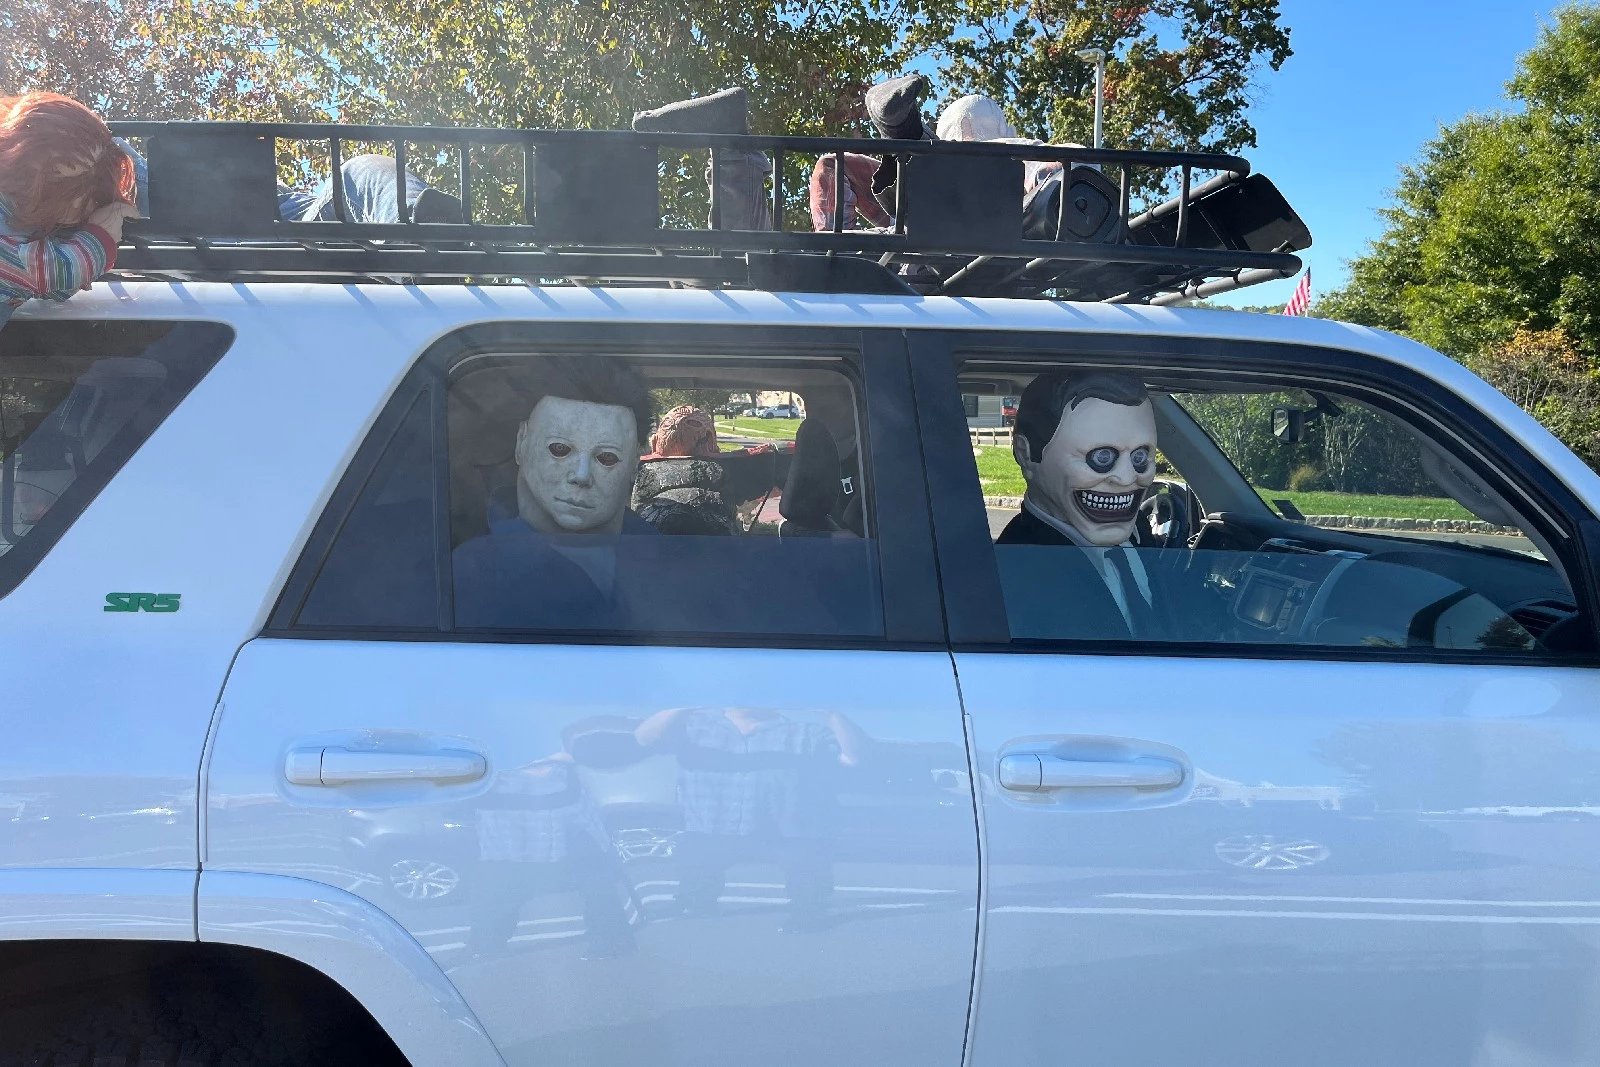 The creepiest Halloween car in NJ belongs to a guy from Somerset image